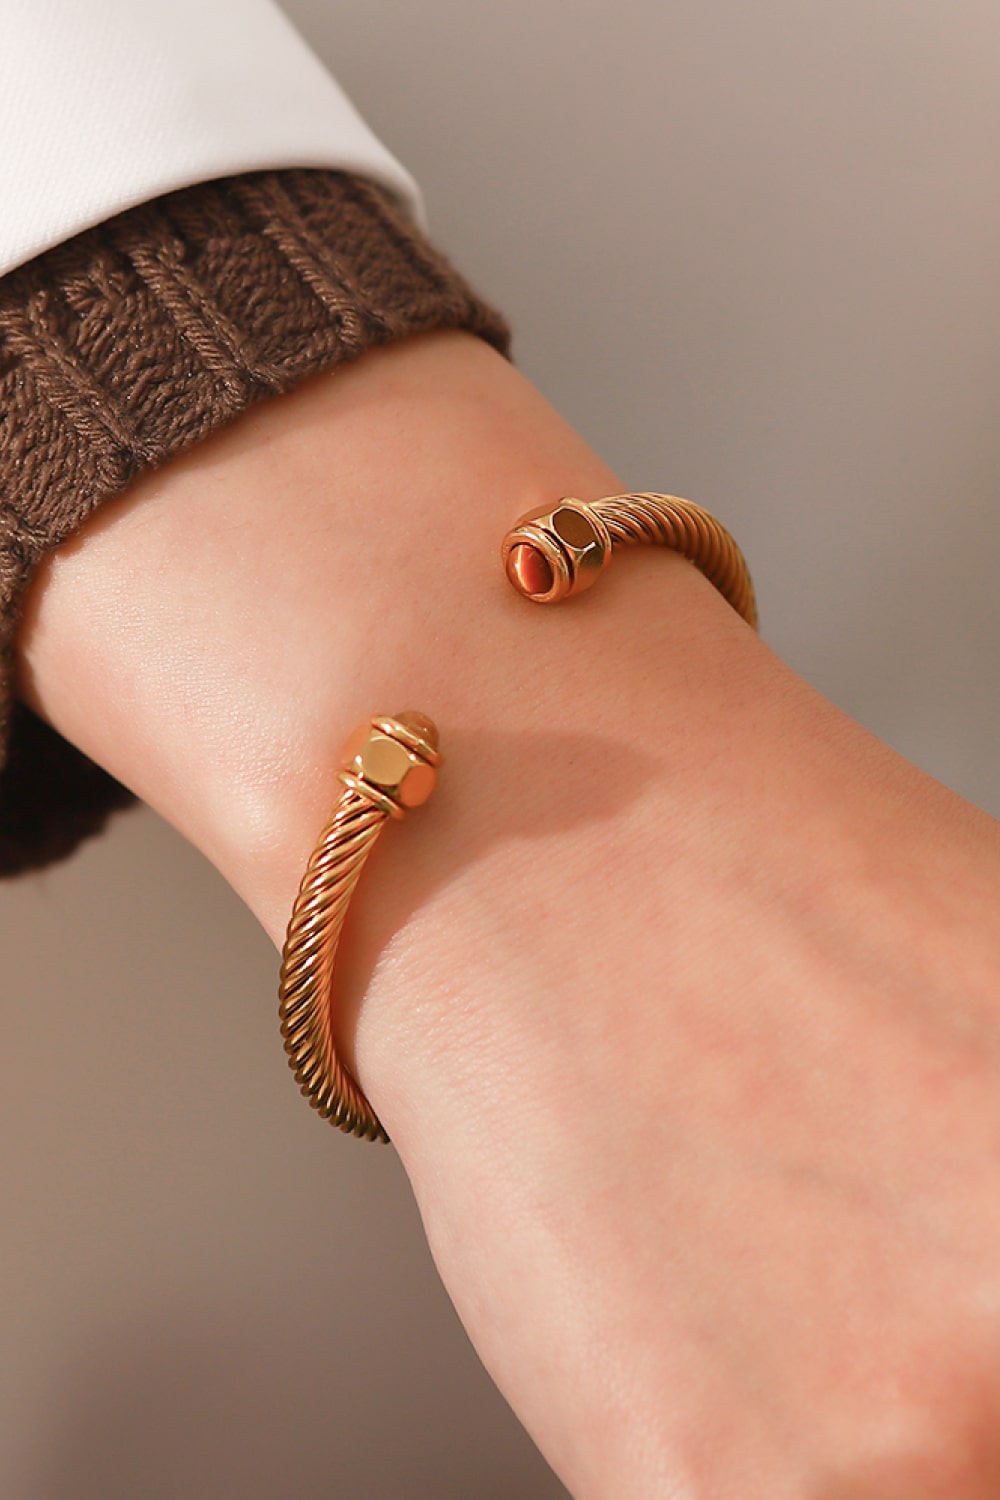 Stainless Steel Twisted C-Shaped Bracelet - Brown/Gold / One Size - T-Shirts - Bracelets - 1 - 2024